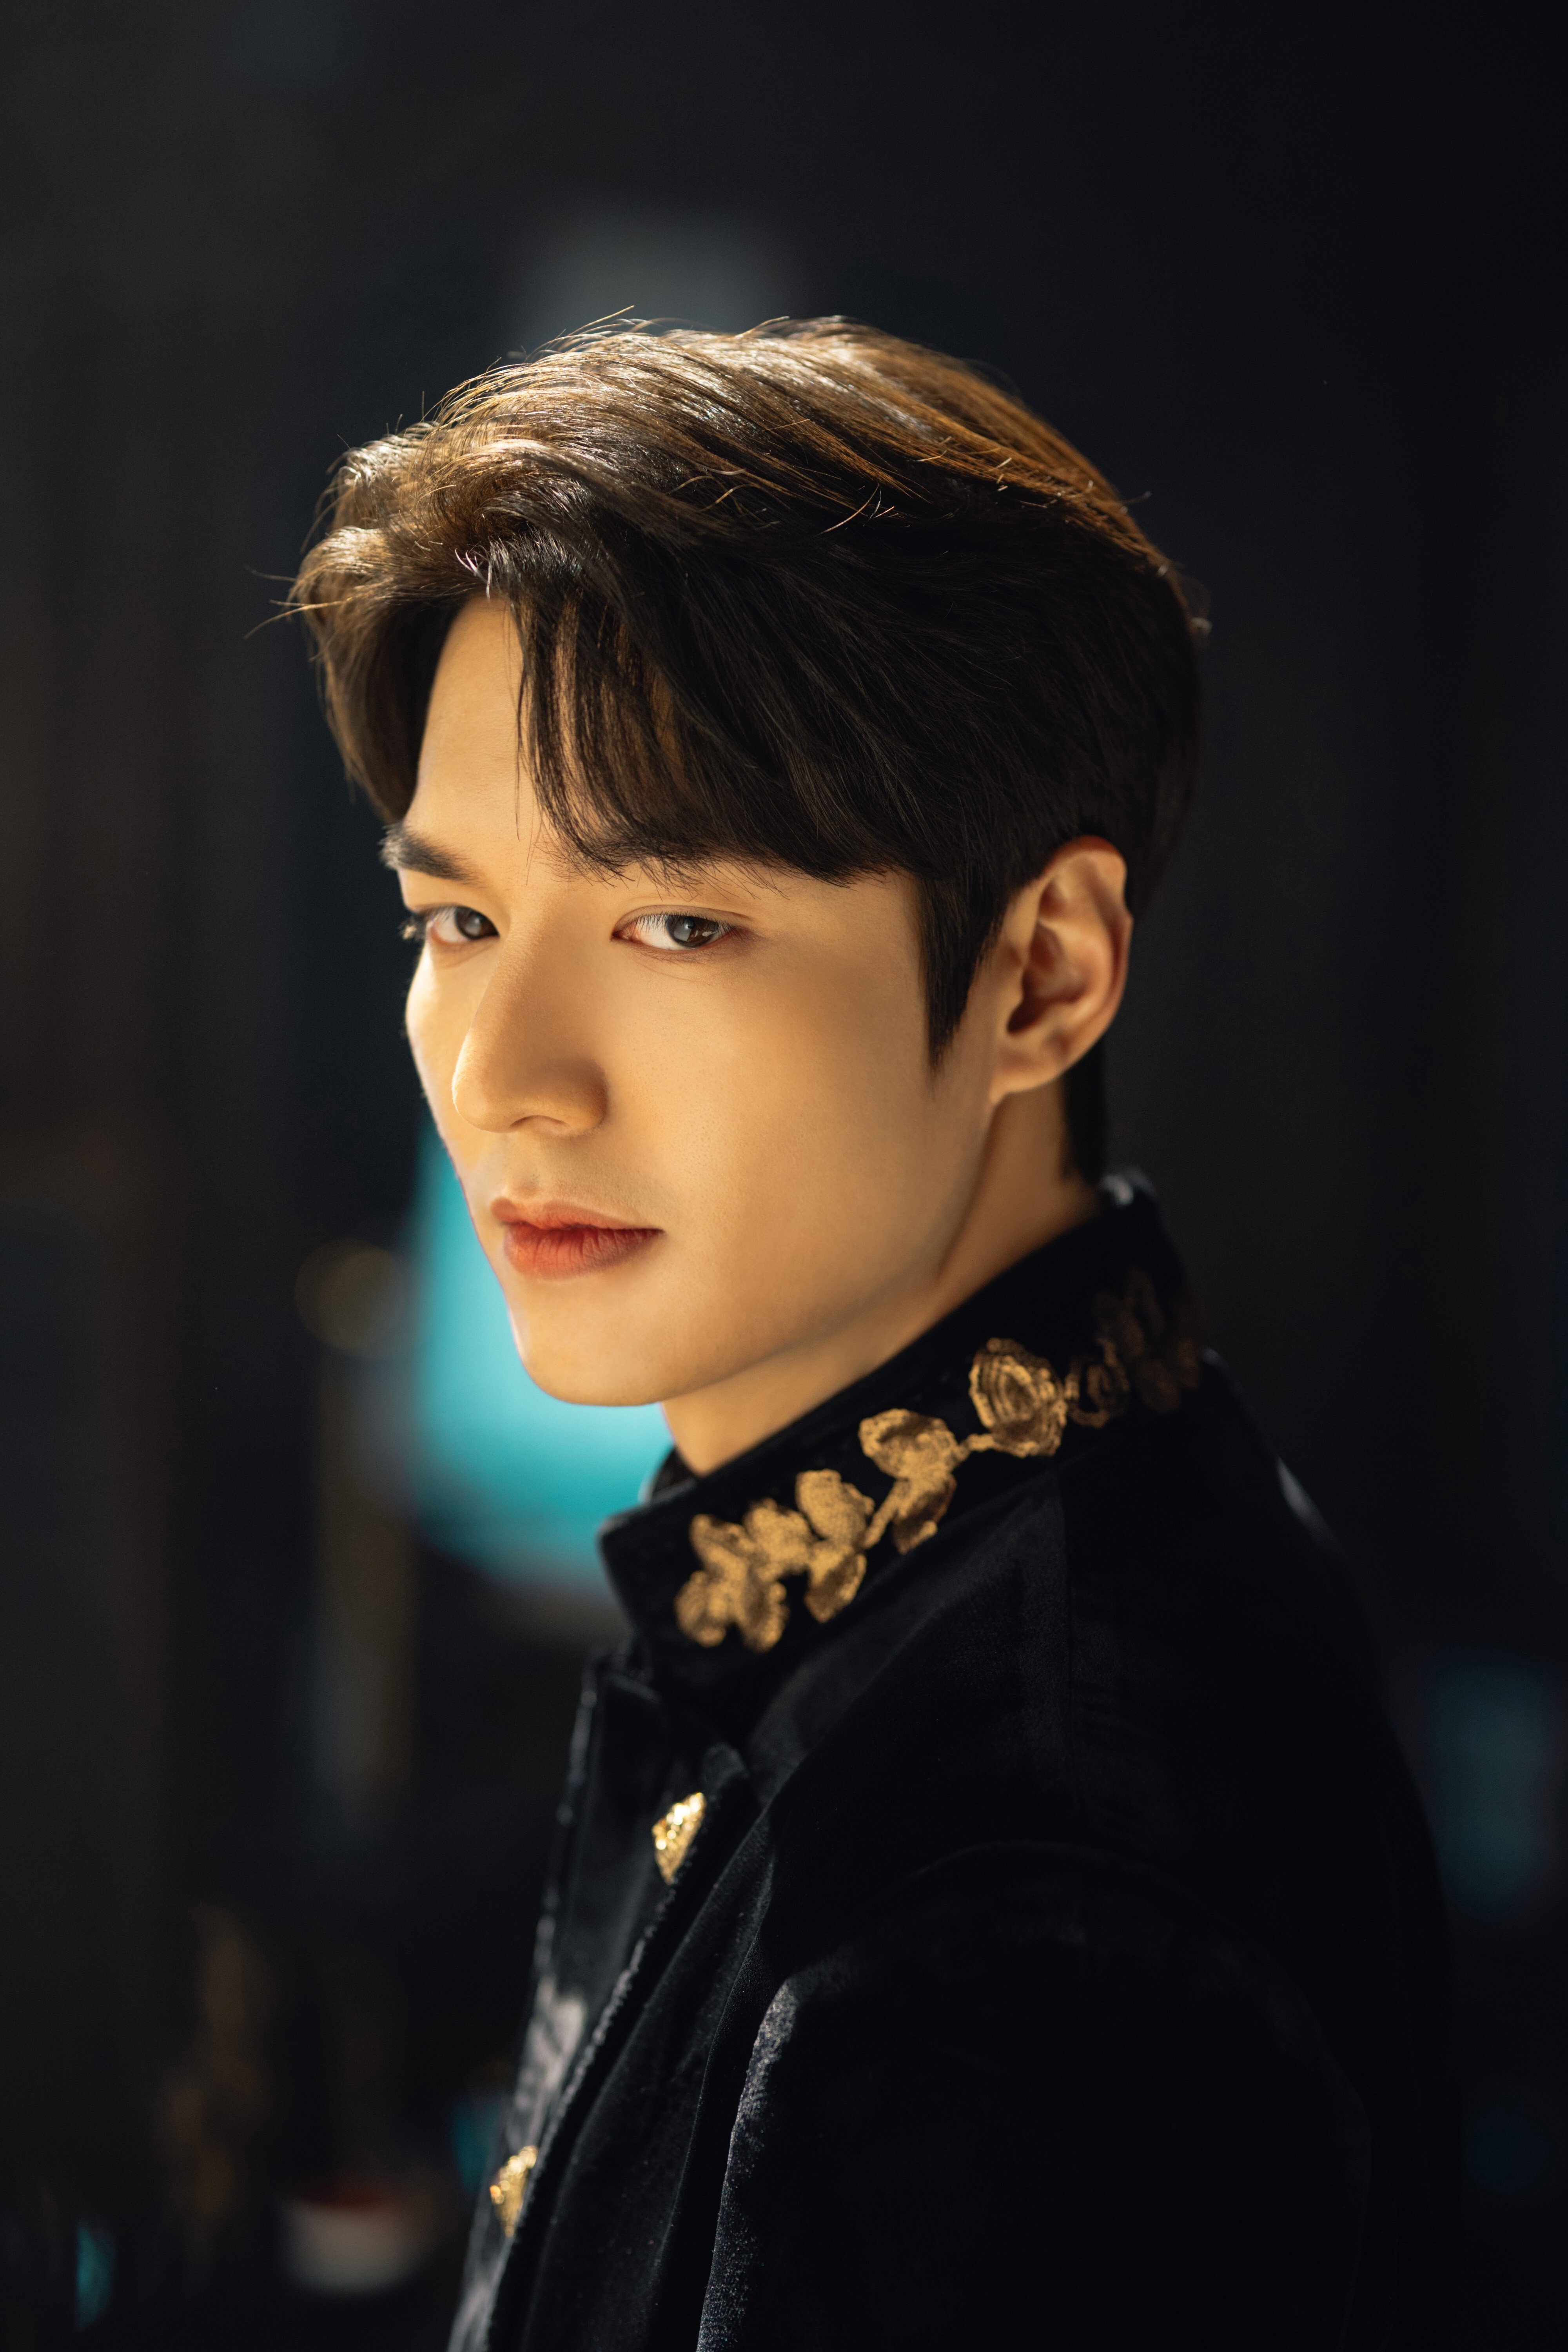 The Cast Members Of The King: Eternal Monarch Spill 9 Facts About Each  Other